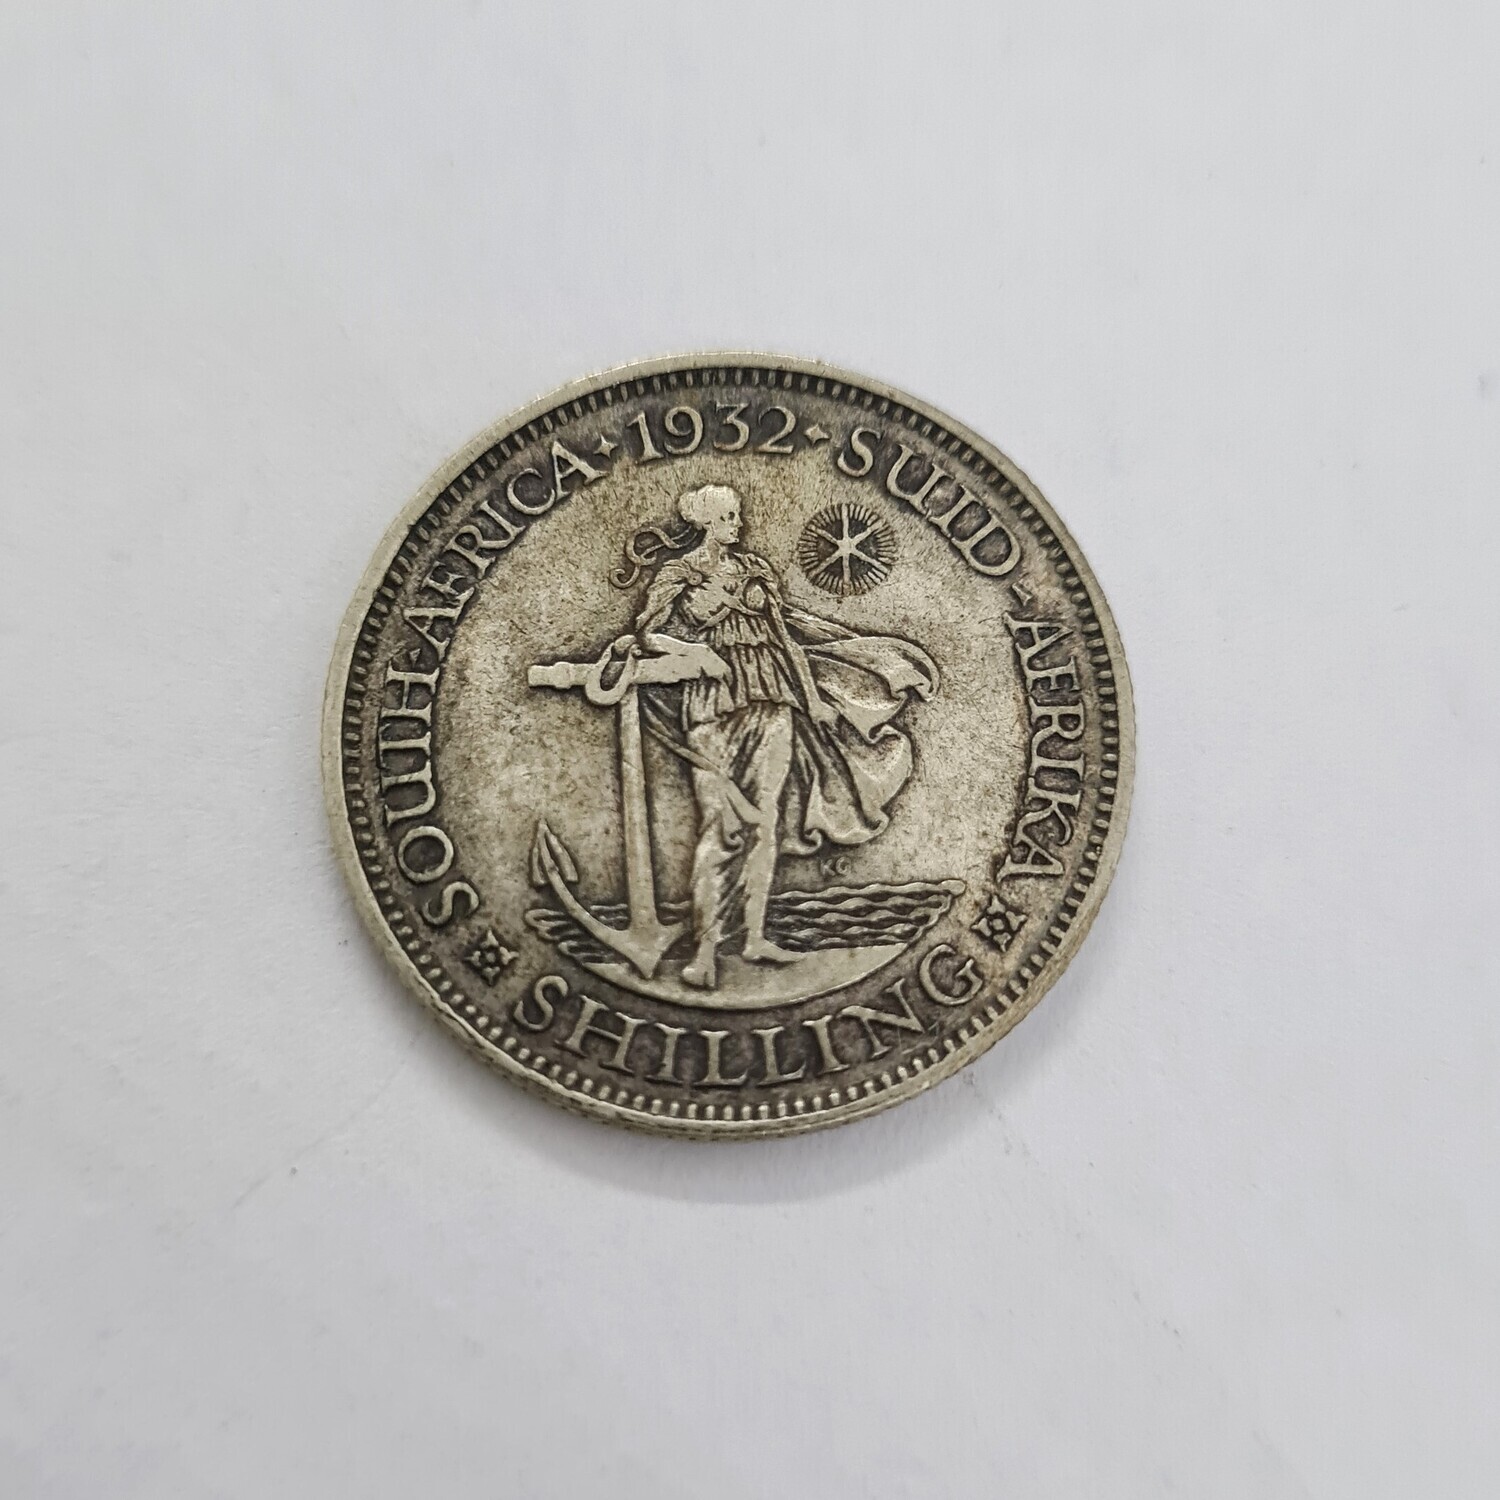 SOUTH AFRICA-1 SHILLING- GEORGE VI-1932